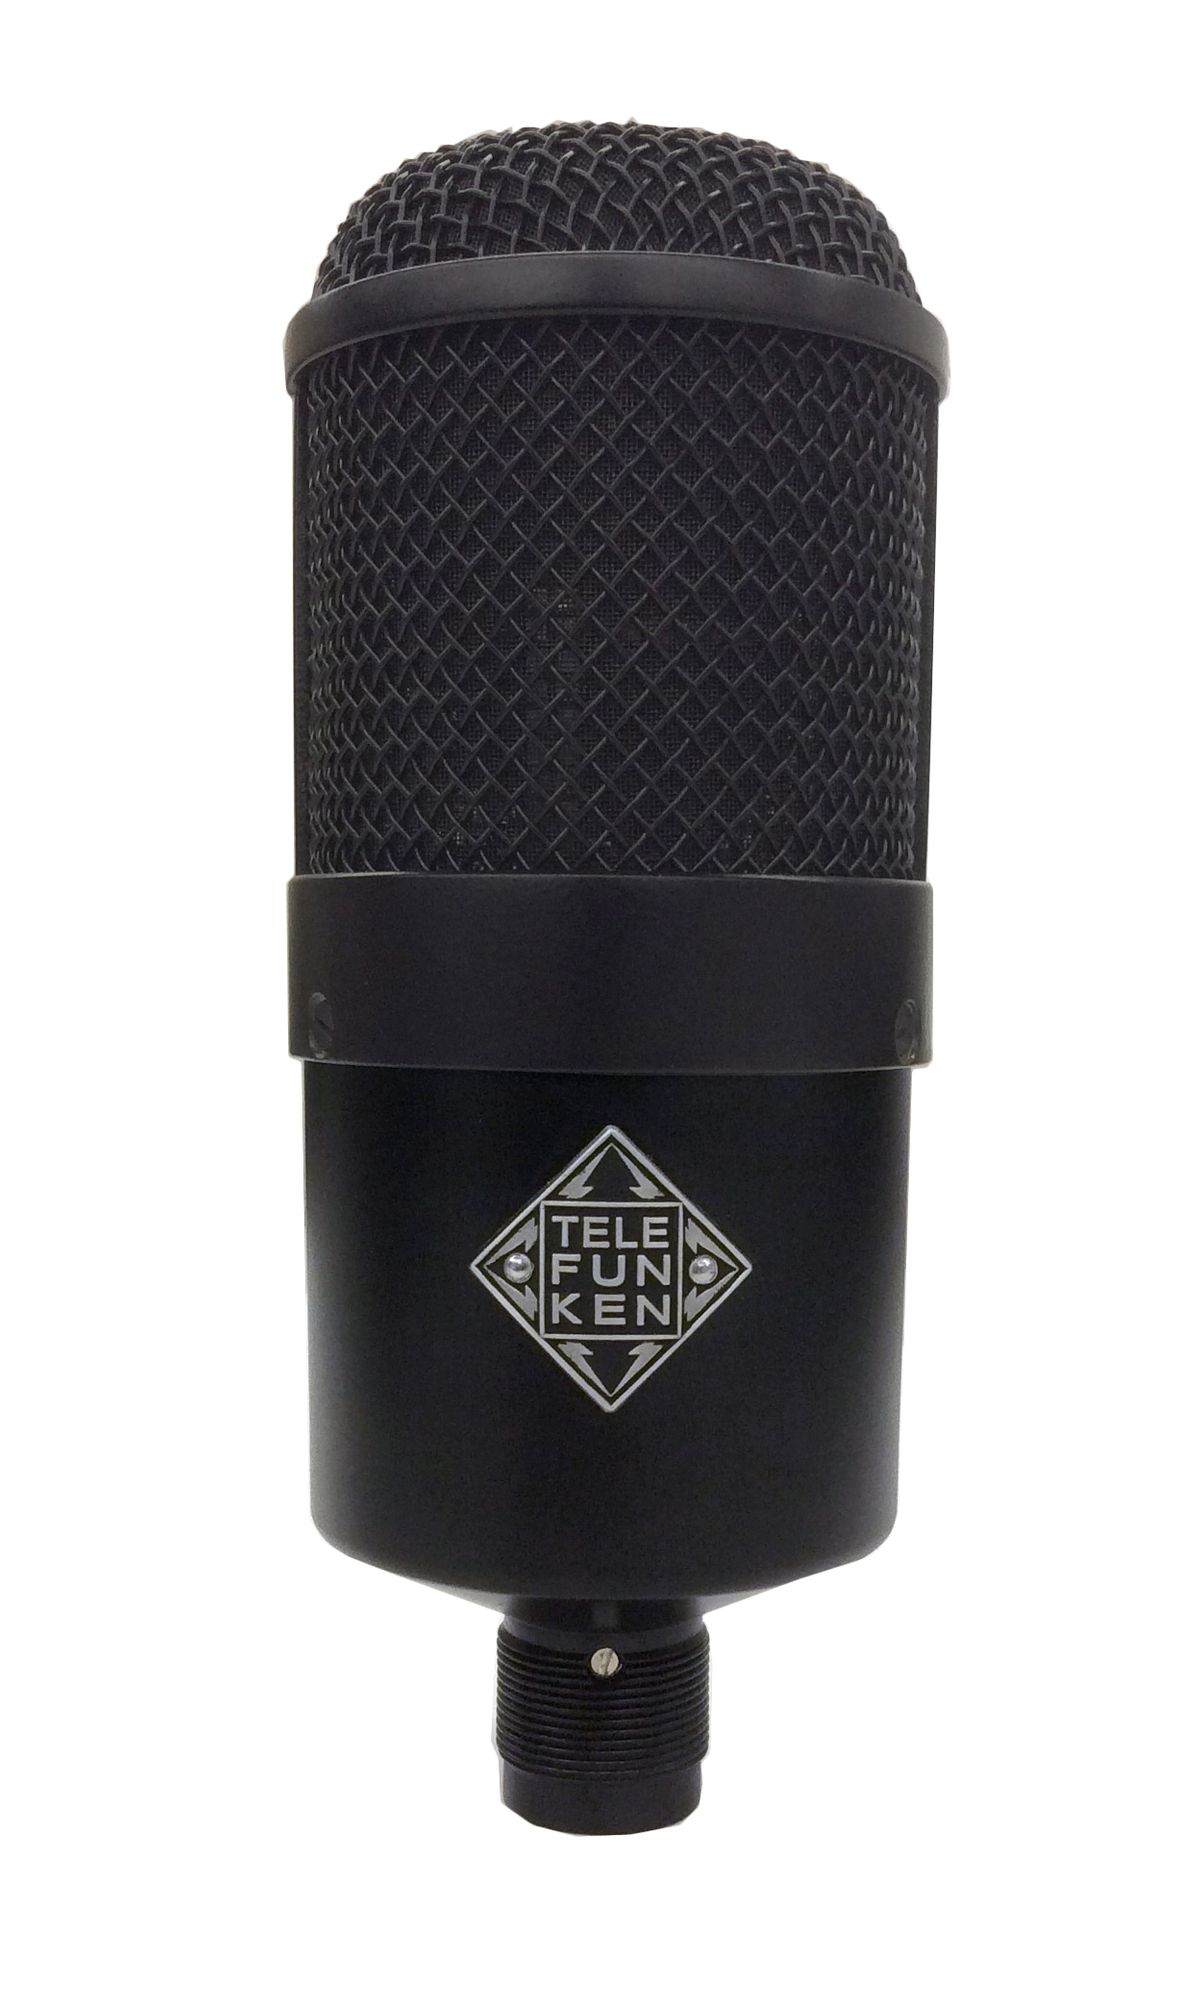 Telefunken M82 Dynamic Microphone at Hollywood Sound Systems